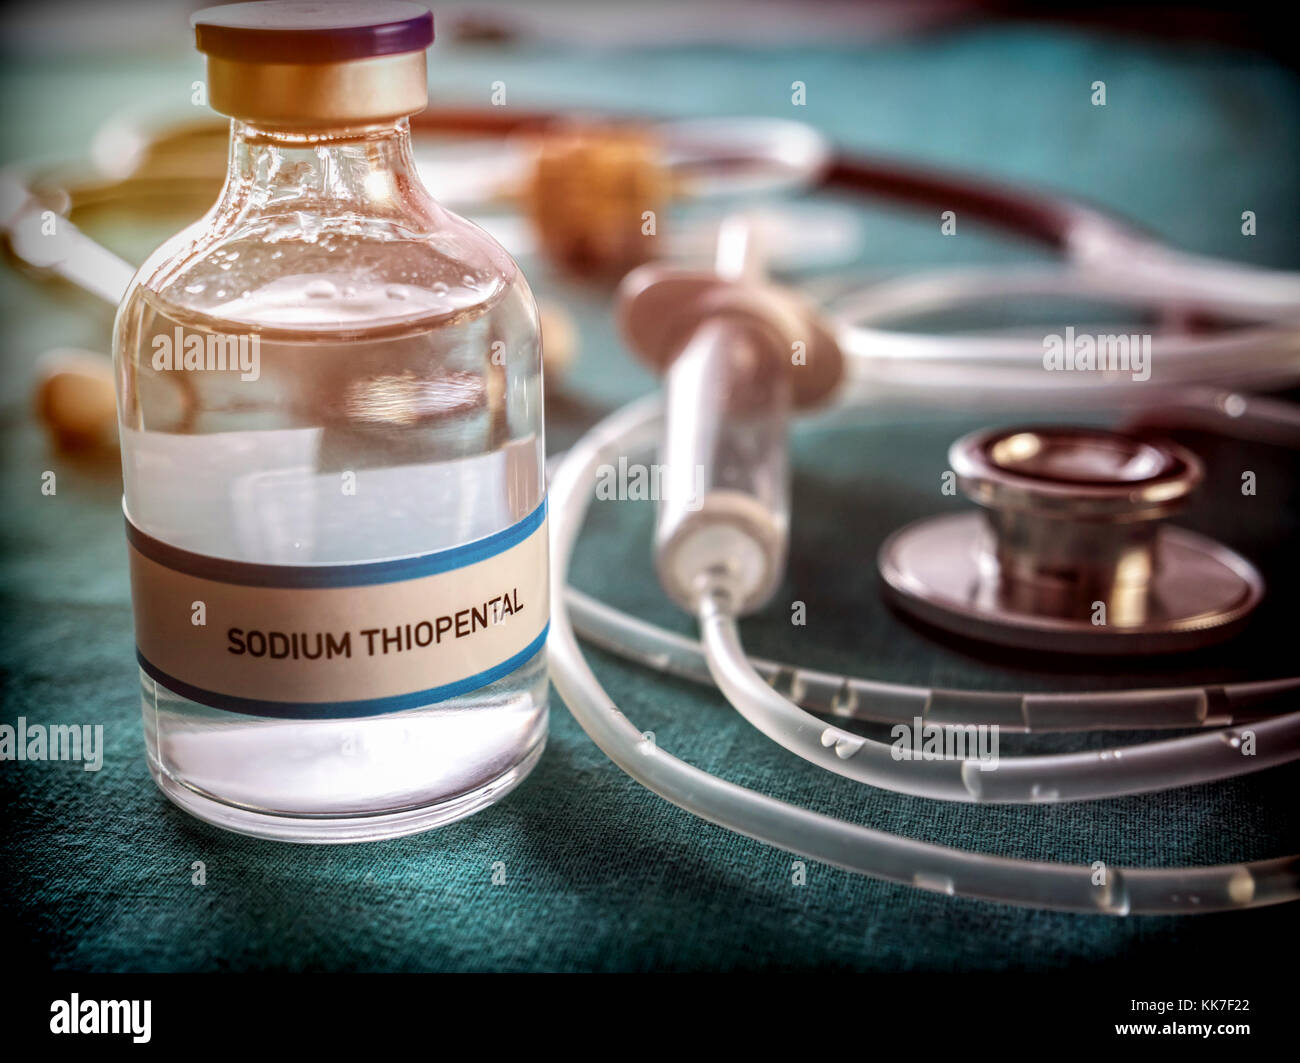 Vial with Sodium Thiopental used for euthanasia and lethal inyecion in a hospital, conceptual image Stock Photo